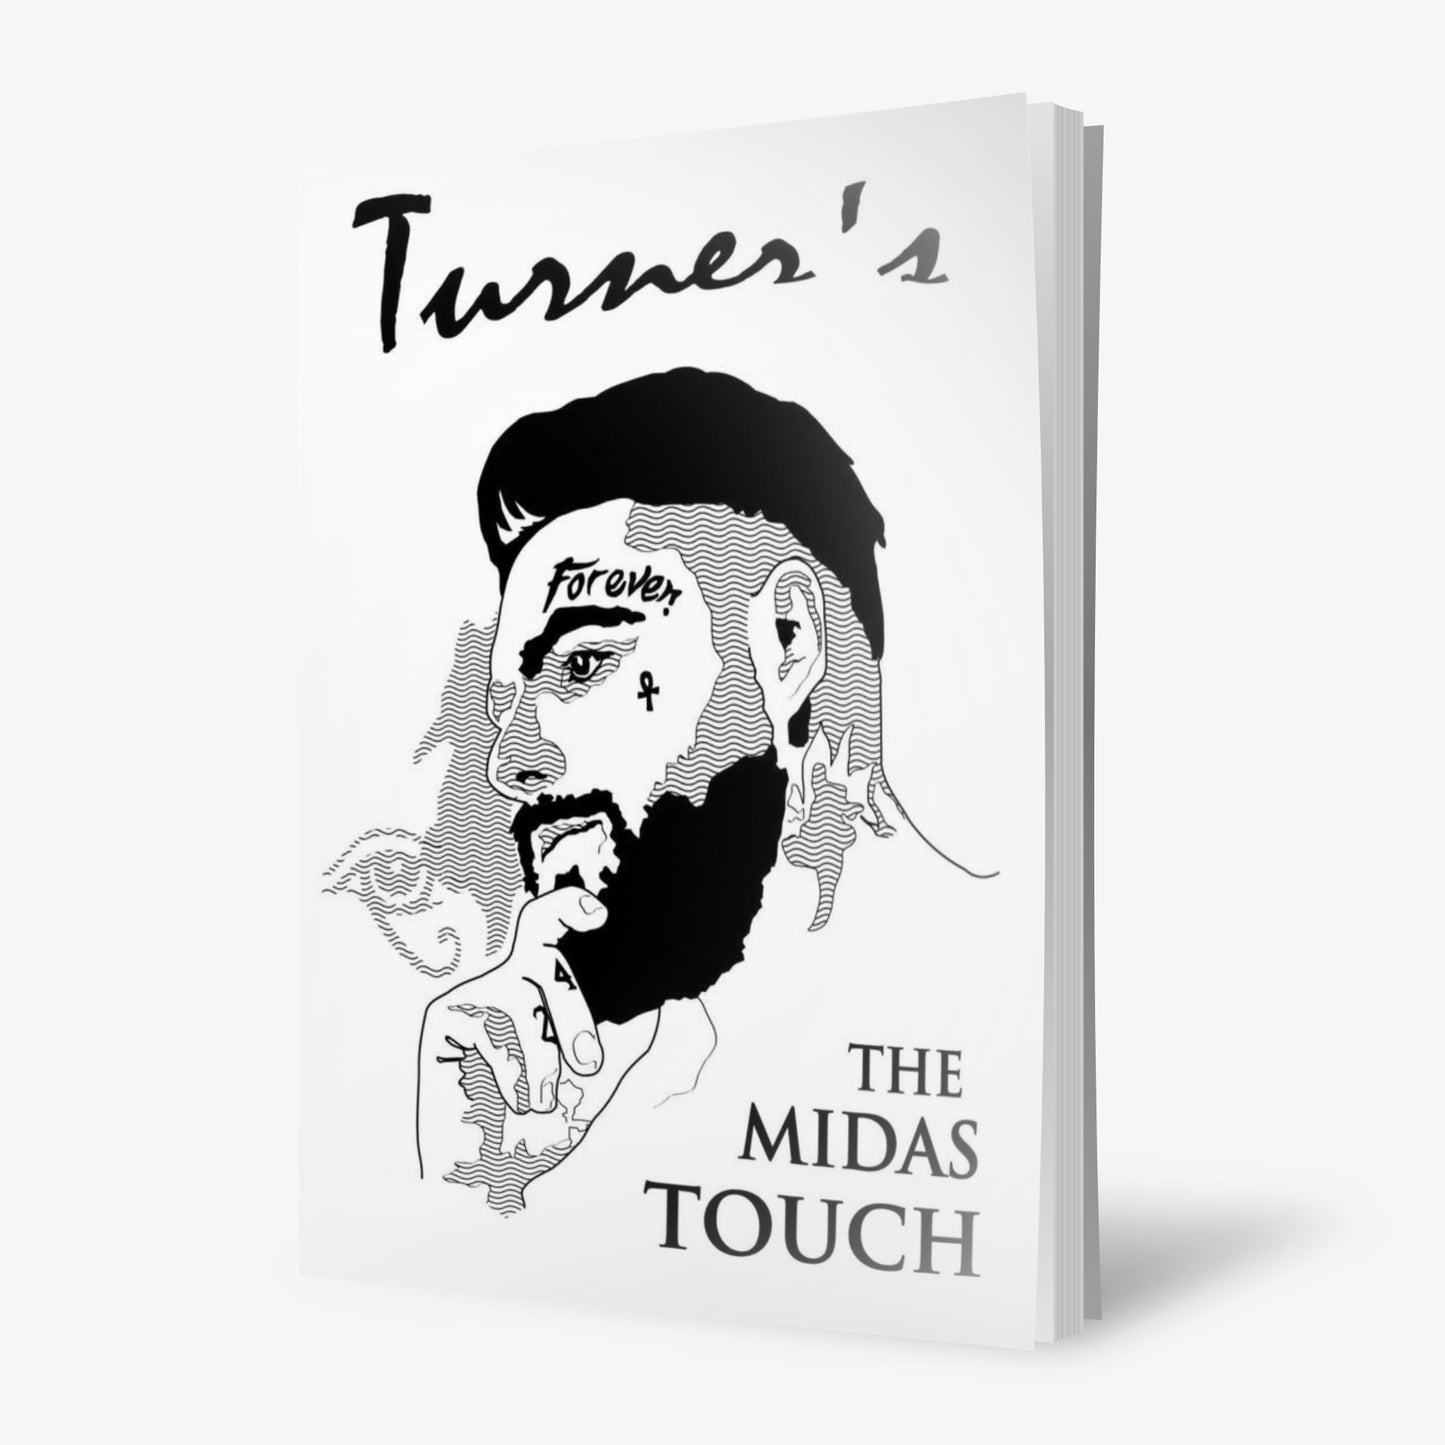 The Midas Touch by Peter Turner